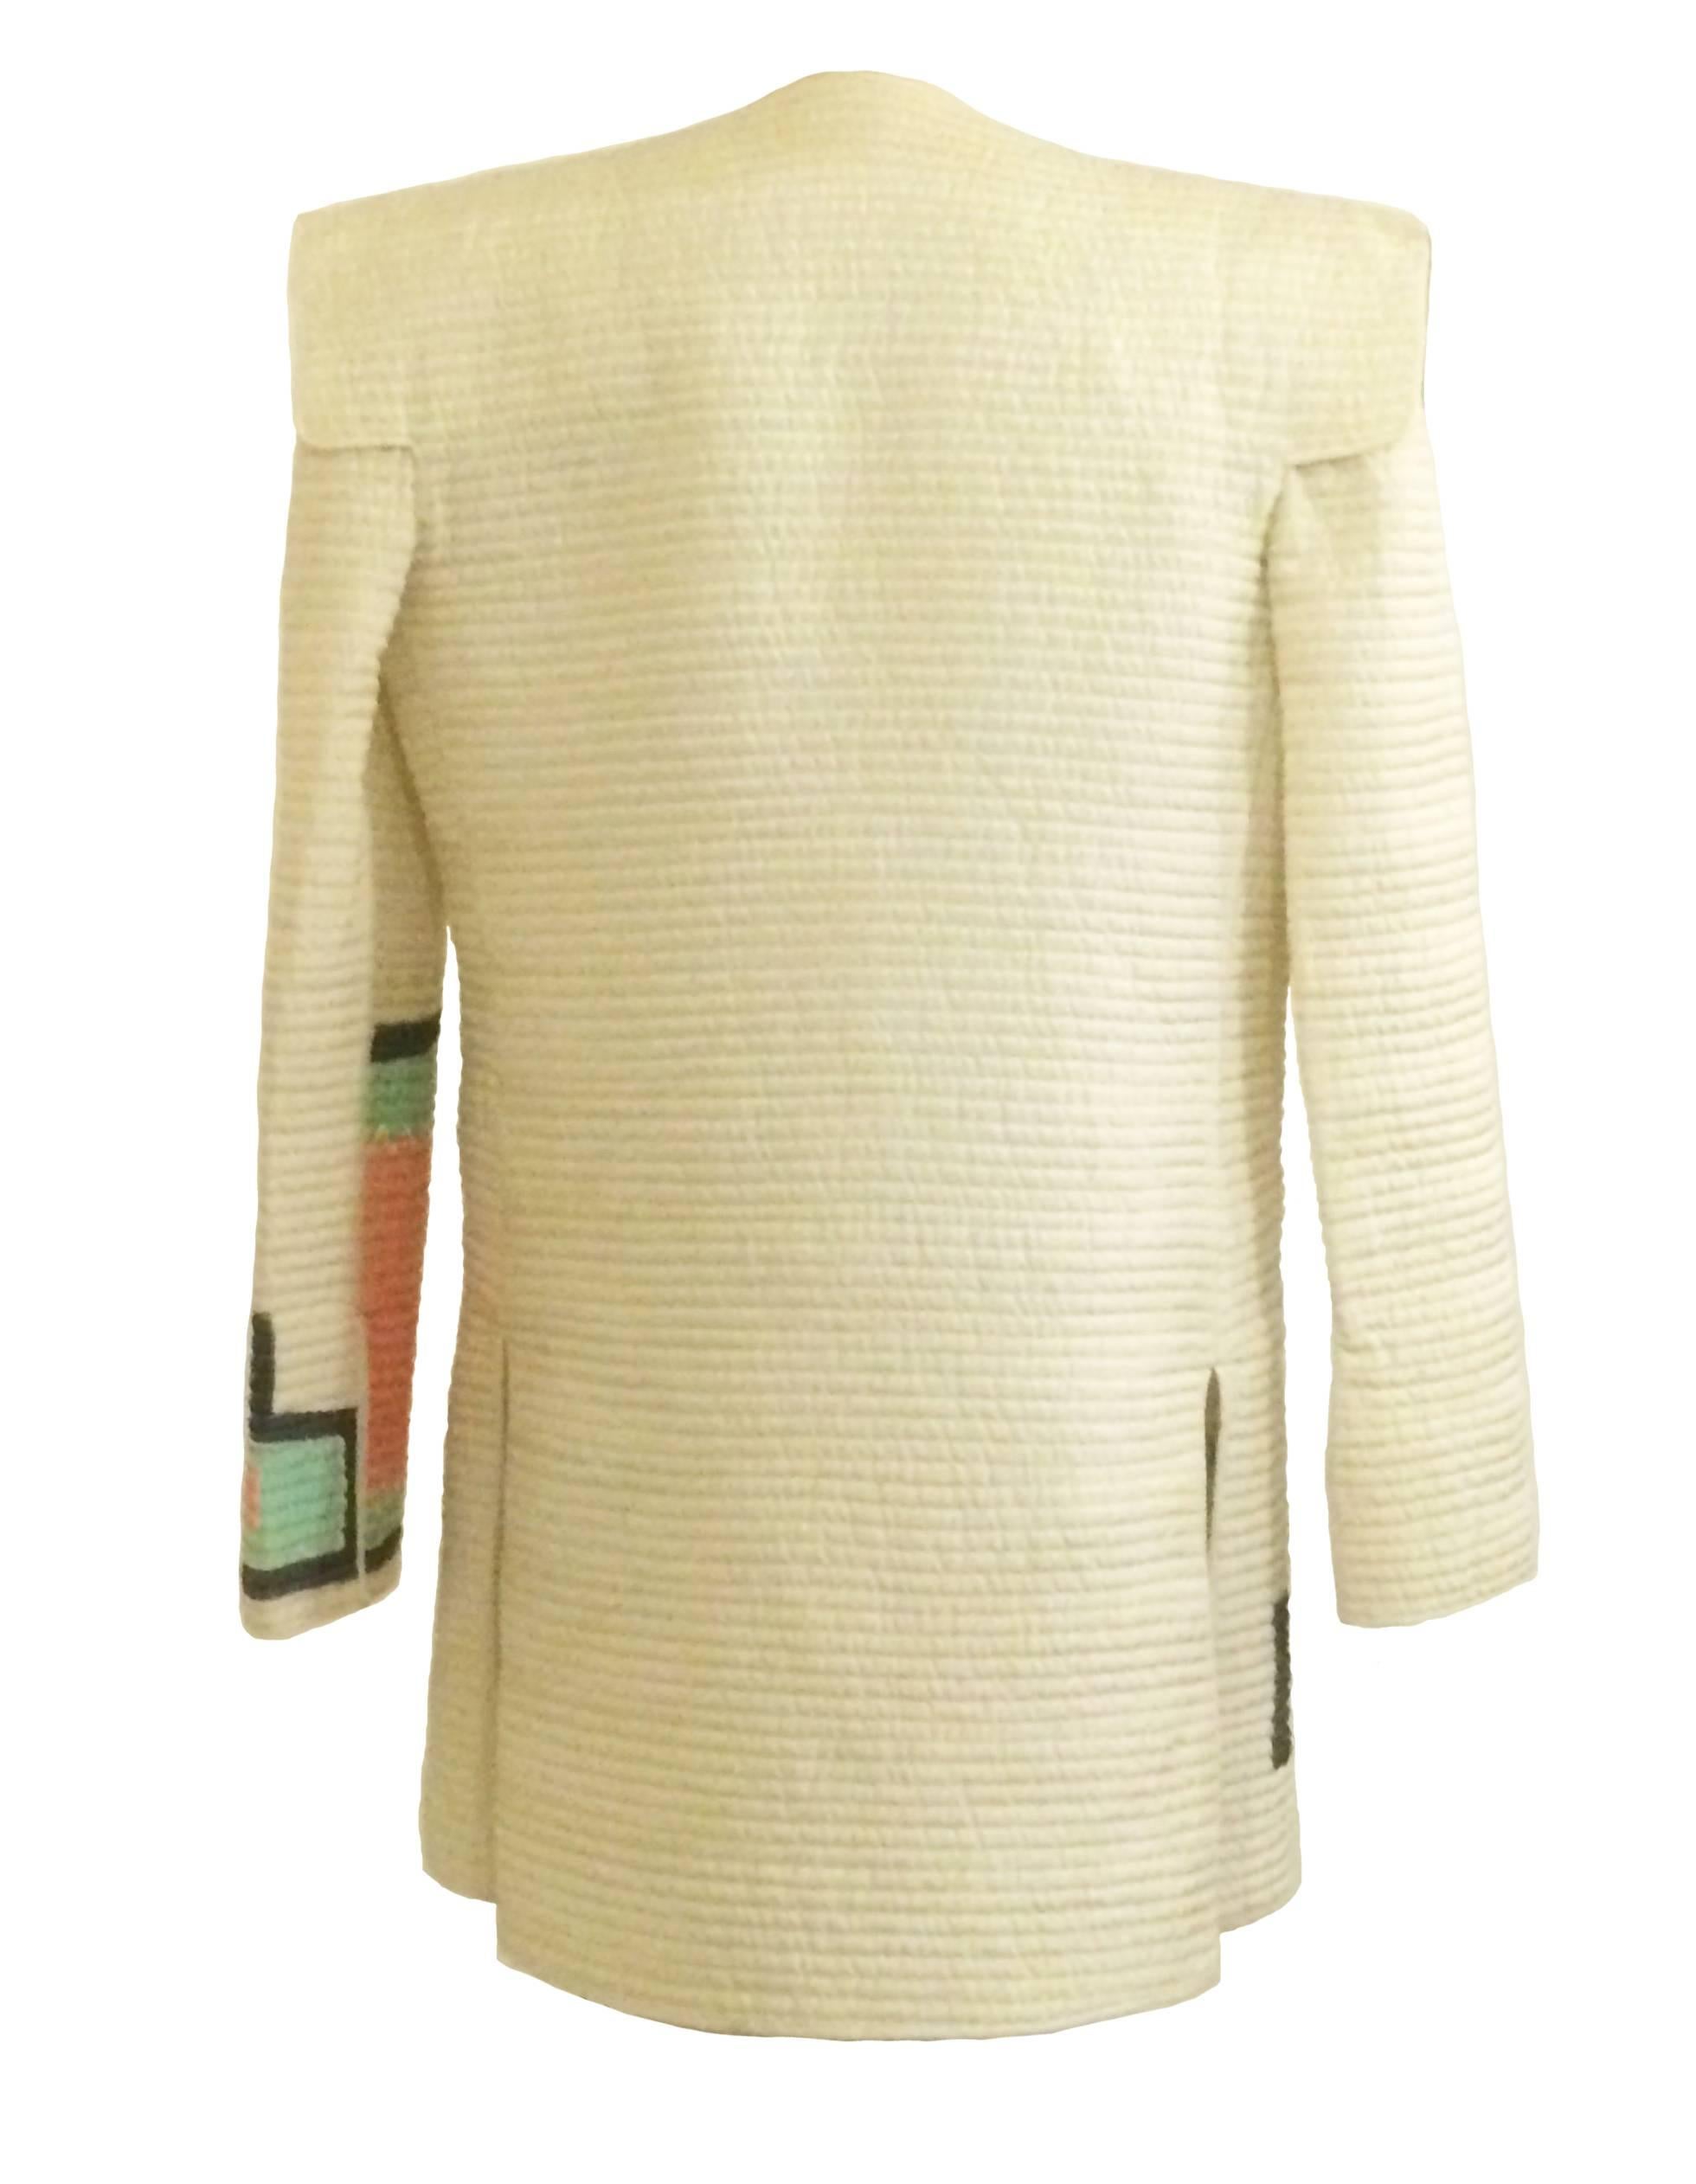 Mary McFadden vintage 1980's cream quilted jacket with pastel print and extended shoulder detail. Open front, light padding at shoulders.

Fabric unknown, feels like silk but could be synthetic.

No size label, best fits S/M, see